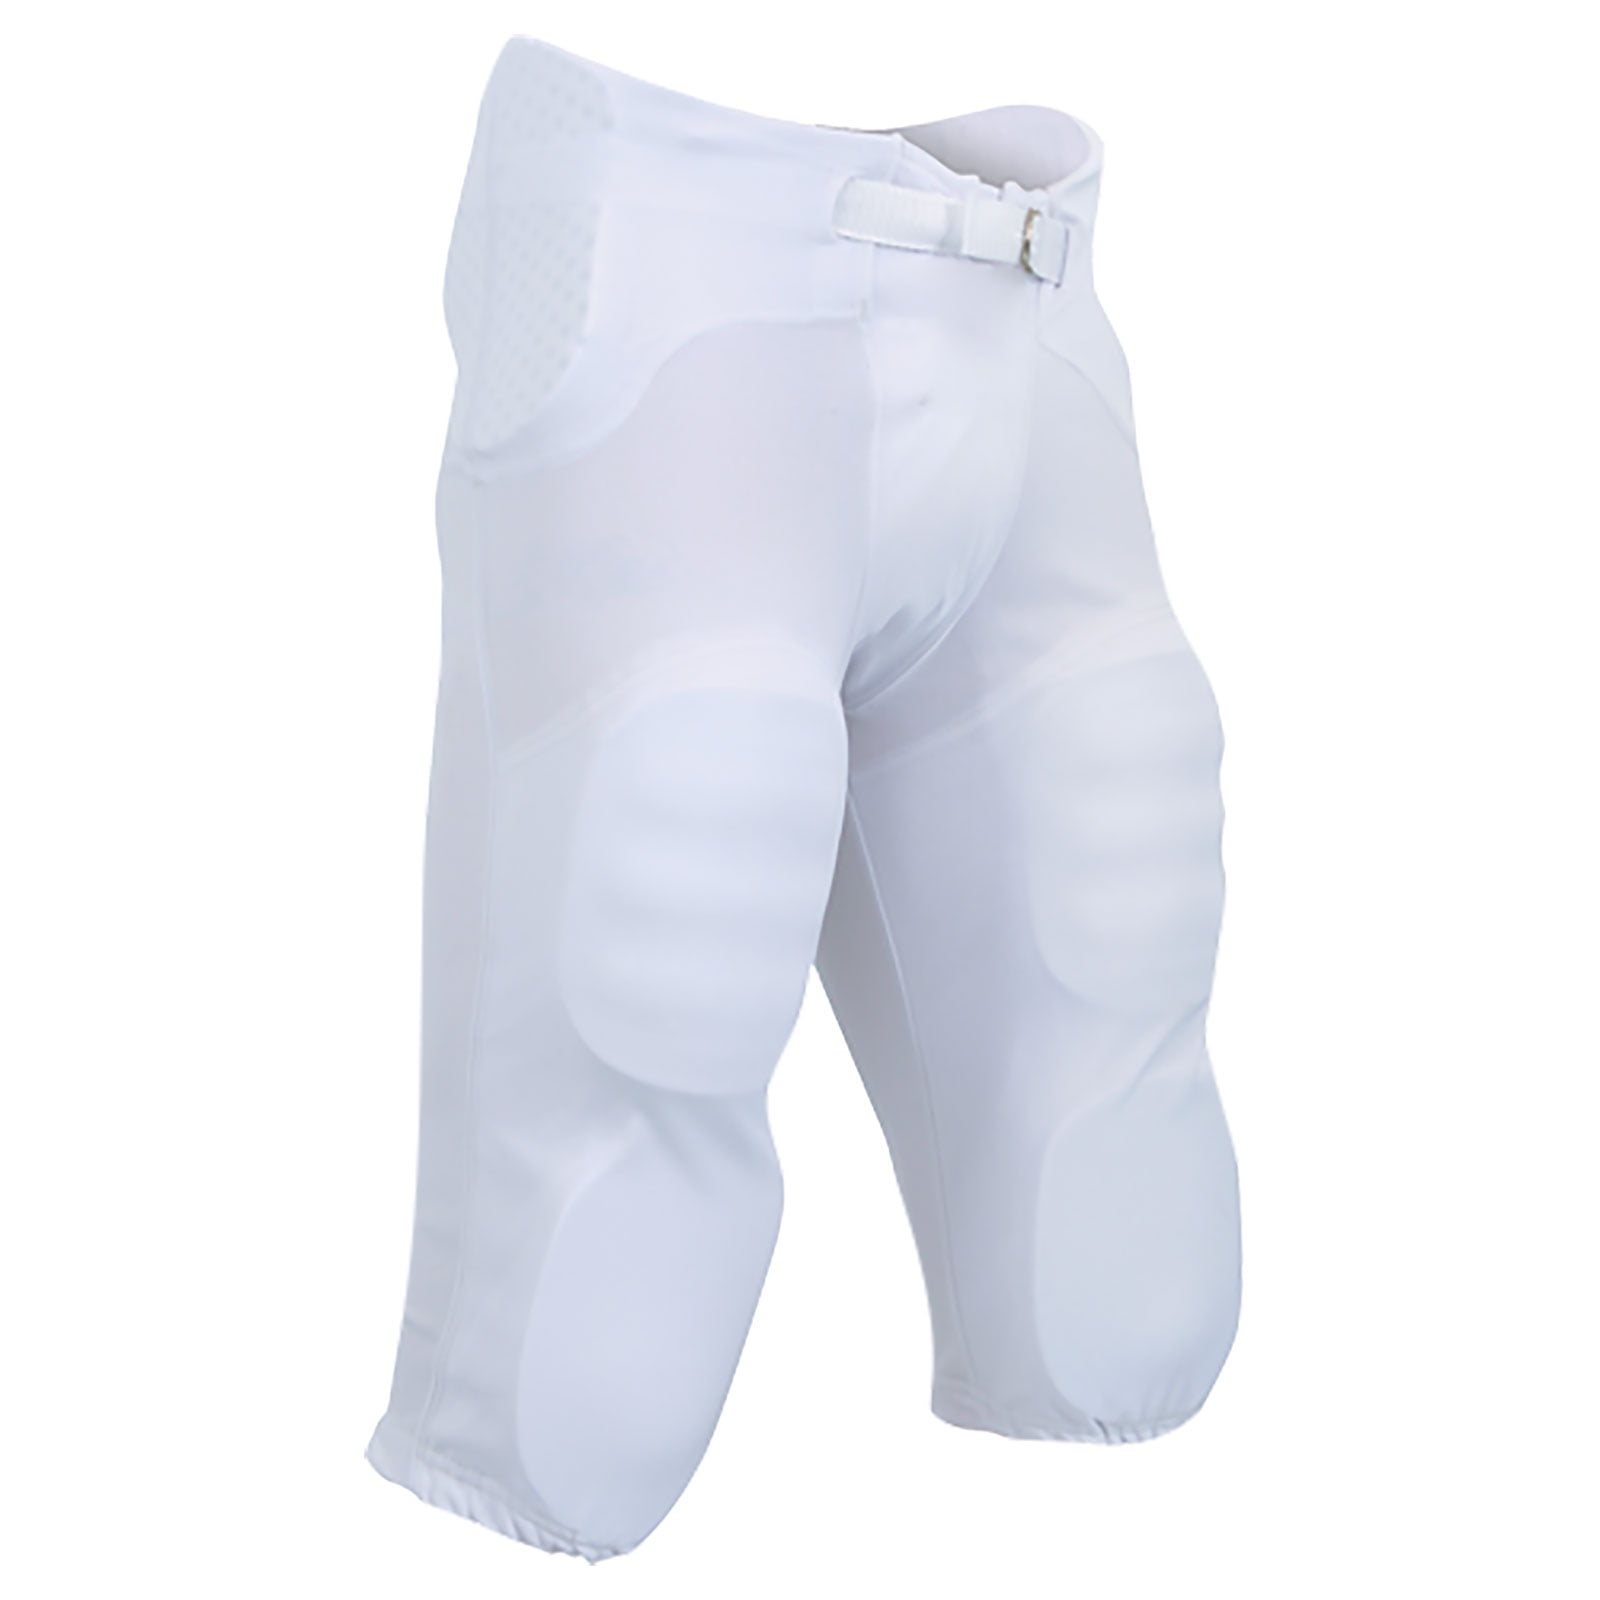 Champro Youth Touchback Football Pant without Pads WHITE XL for